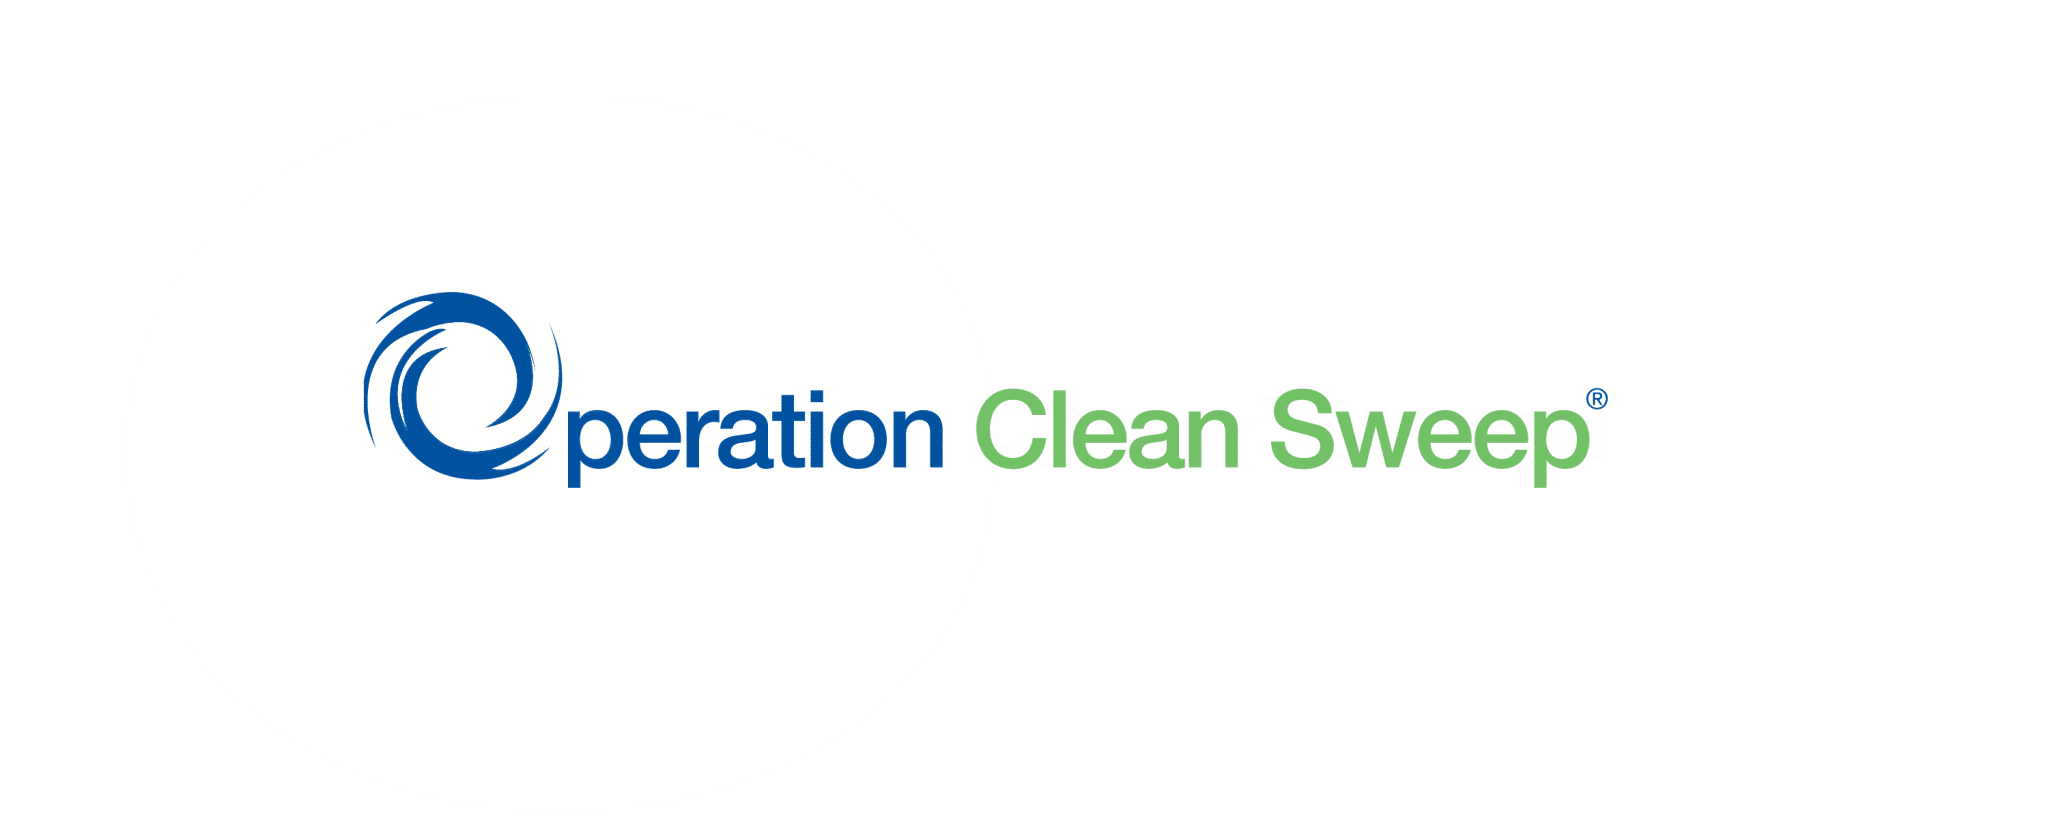 Peration Clean Sweep Logo